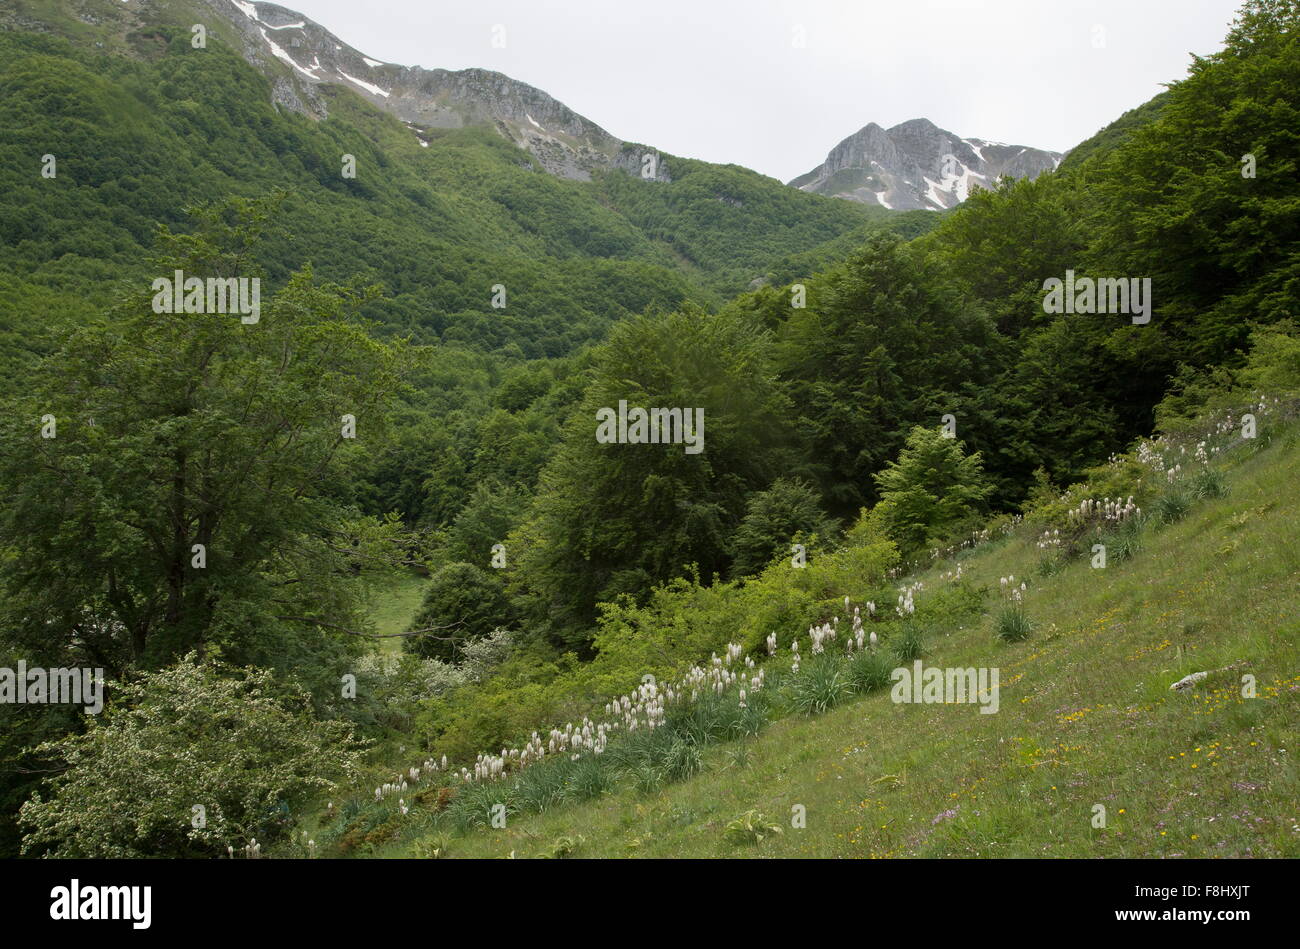 Mass of White Asphodels in high valley, Valle Fiorita, Abruzzo National Park, Italy. Stock Photo